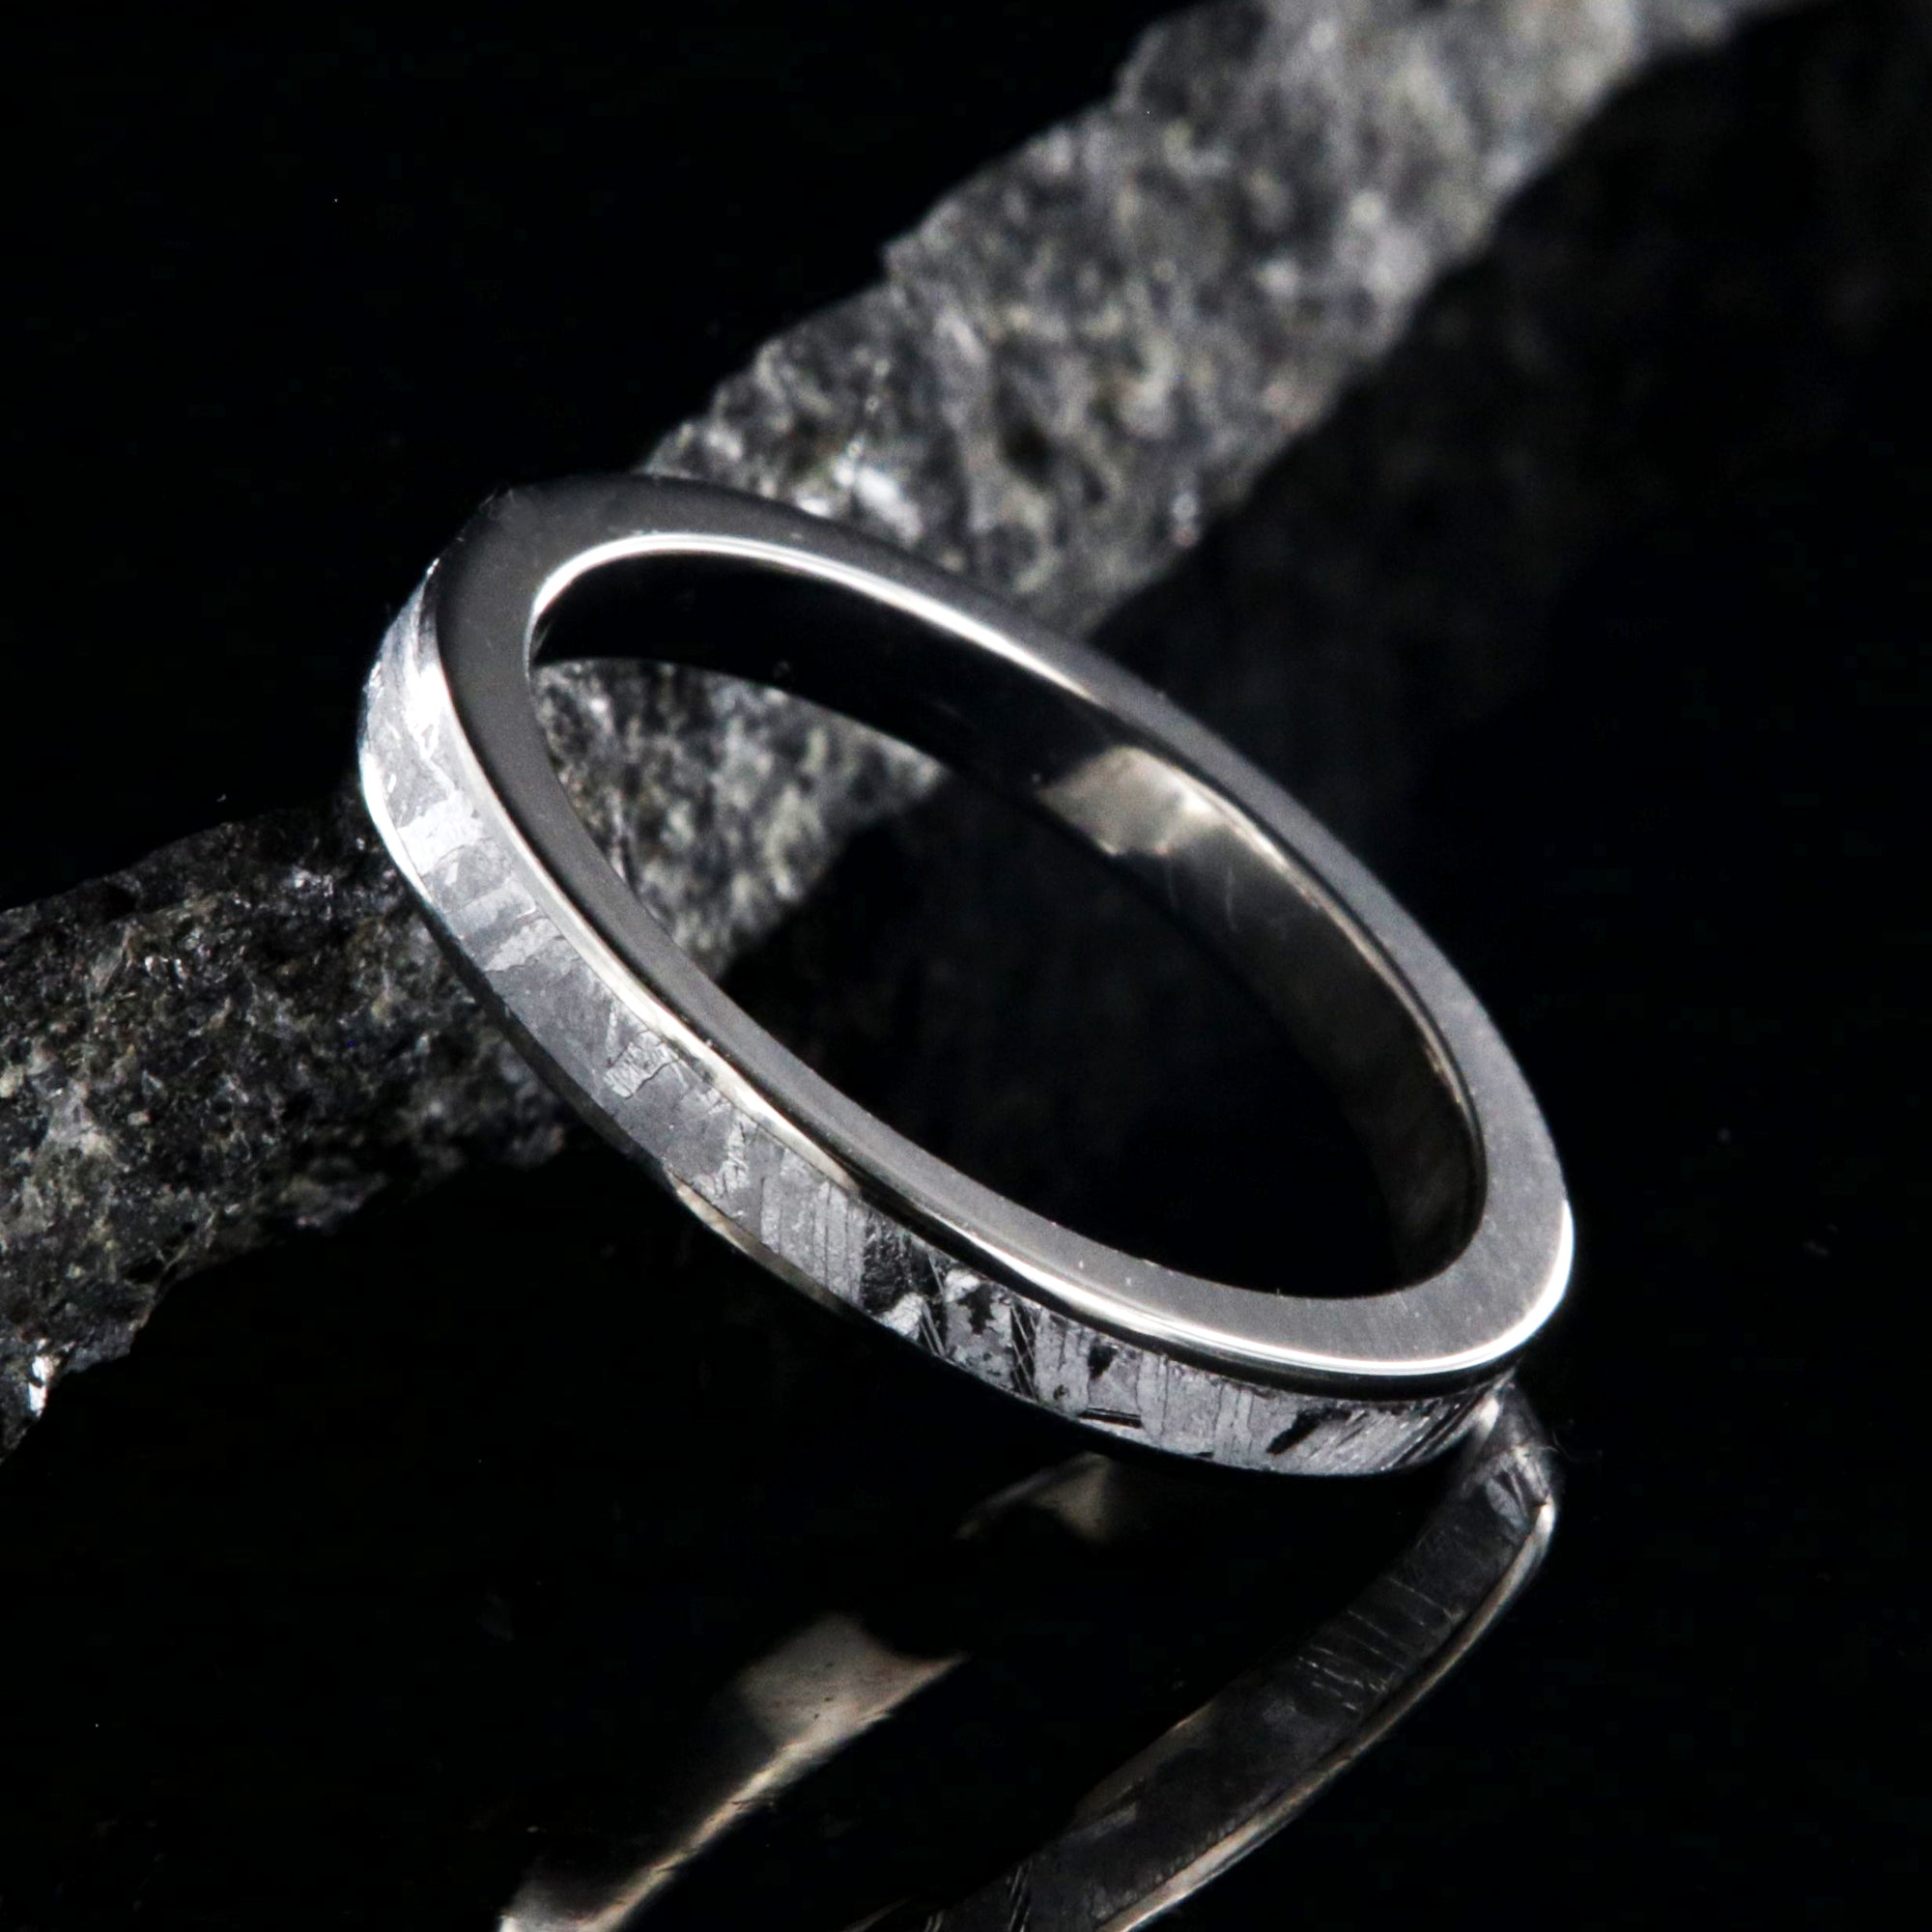 3mm wide women's meteorite wedding band with titanium edges and sleeve